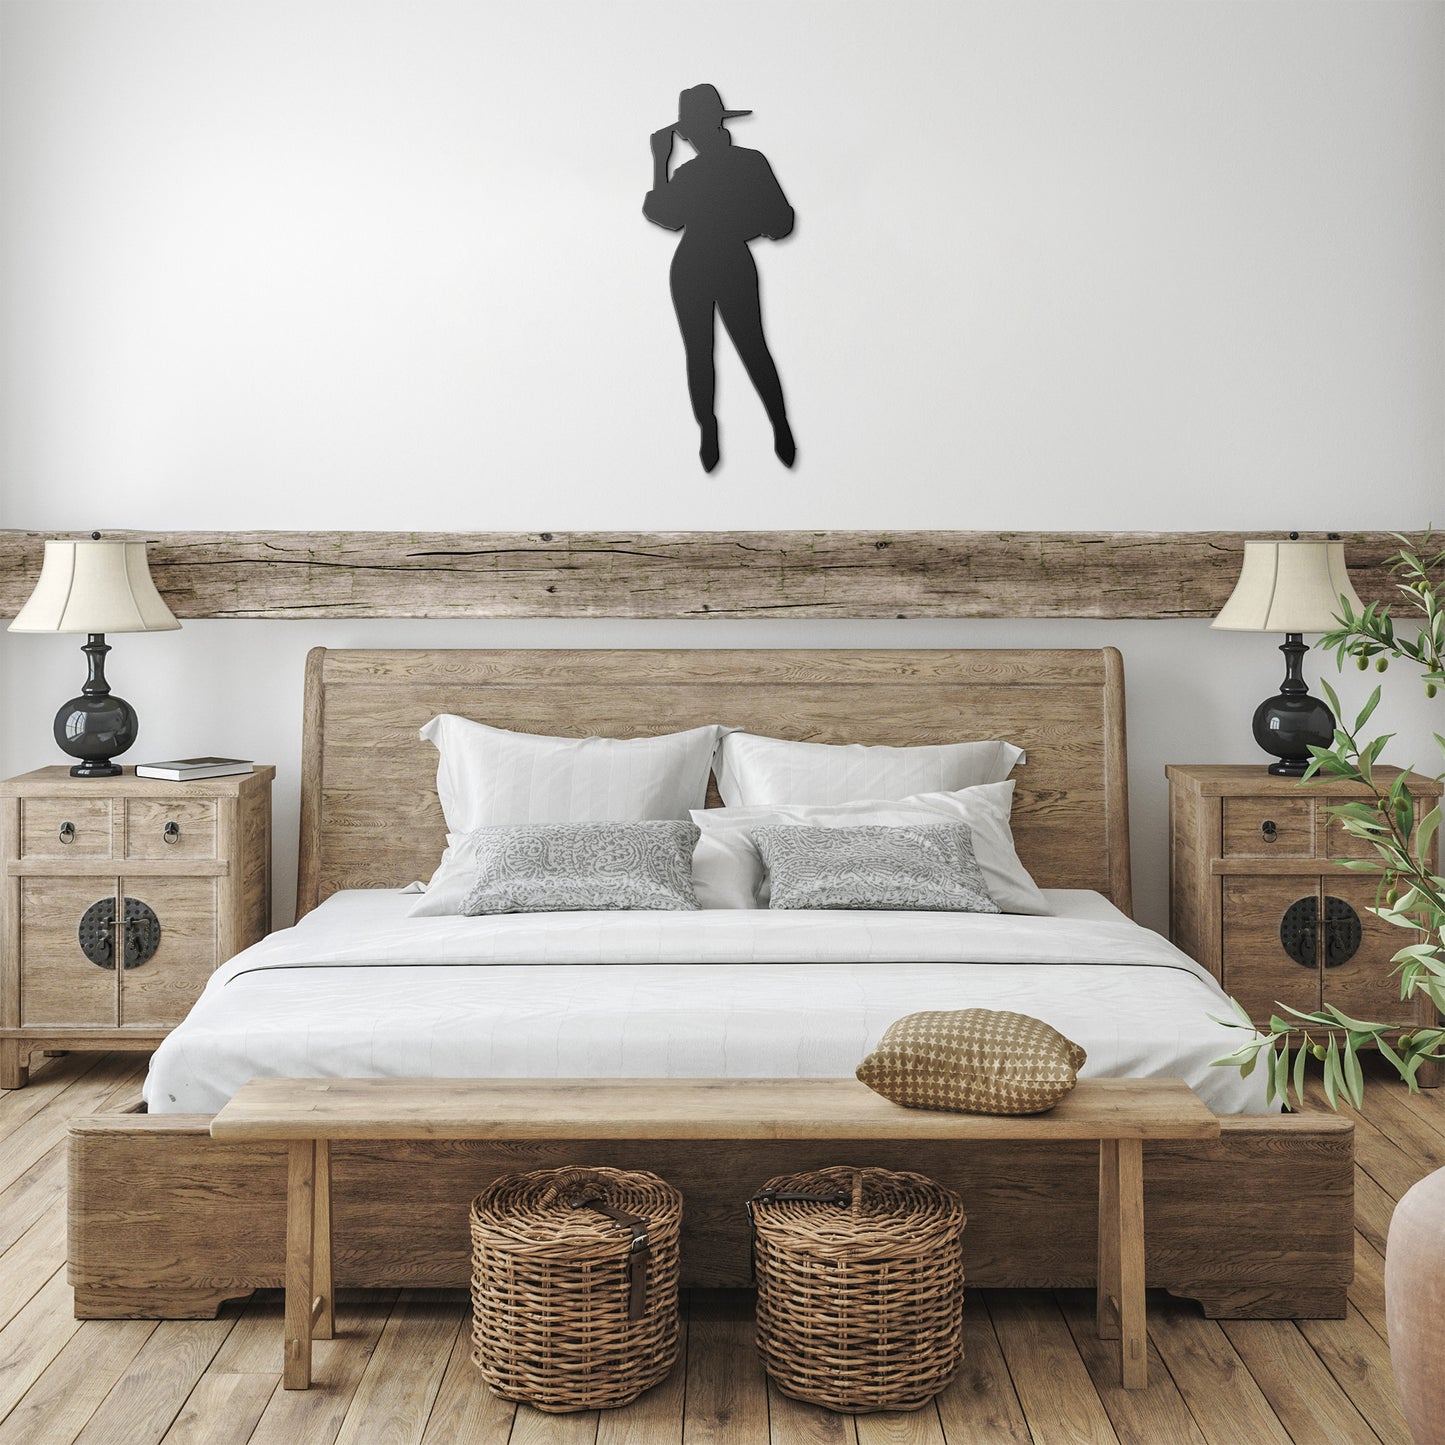 Sophisticated Lady Metal Wall Art